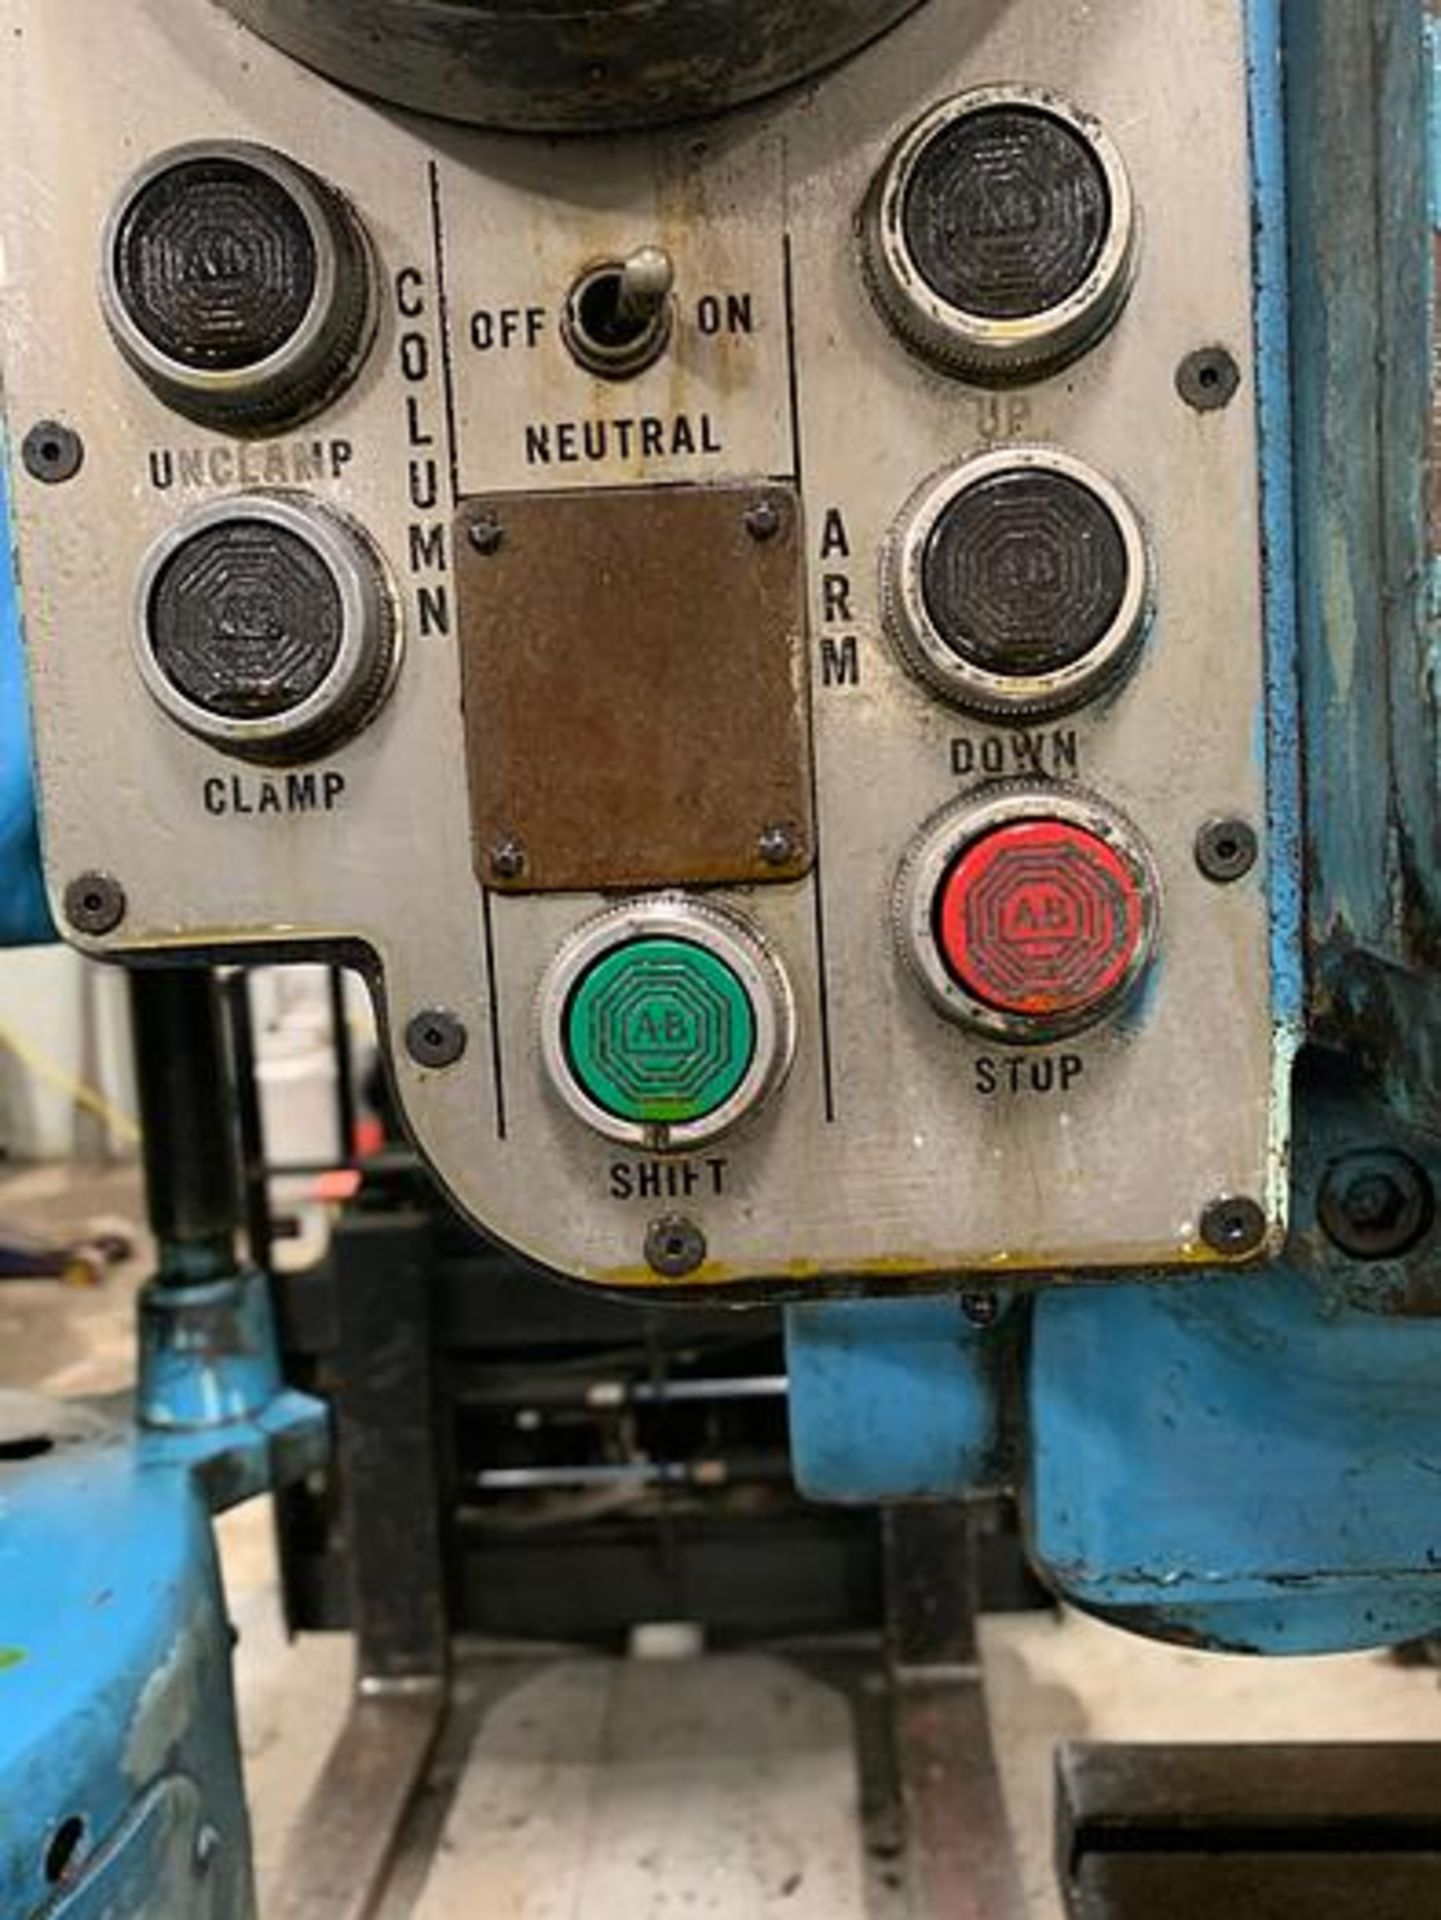 1-USED CARLTON 4' X 13" RADIAL DRILL WITH 3A PRE-SELECT HEAD, SERIAL NUMBER 3A-4542 - Image 9 of 16